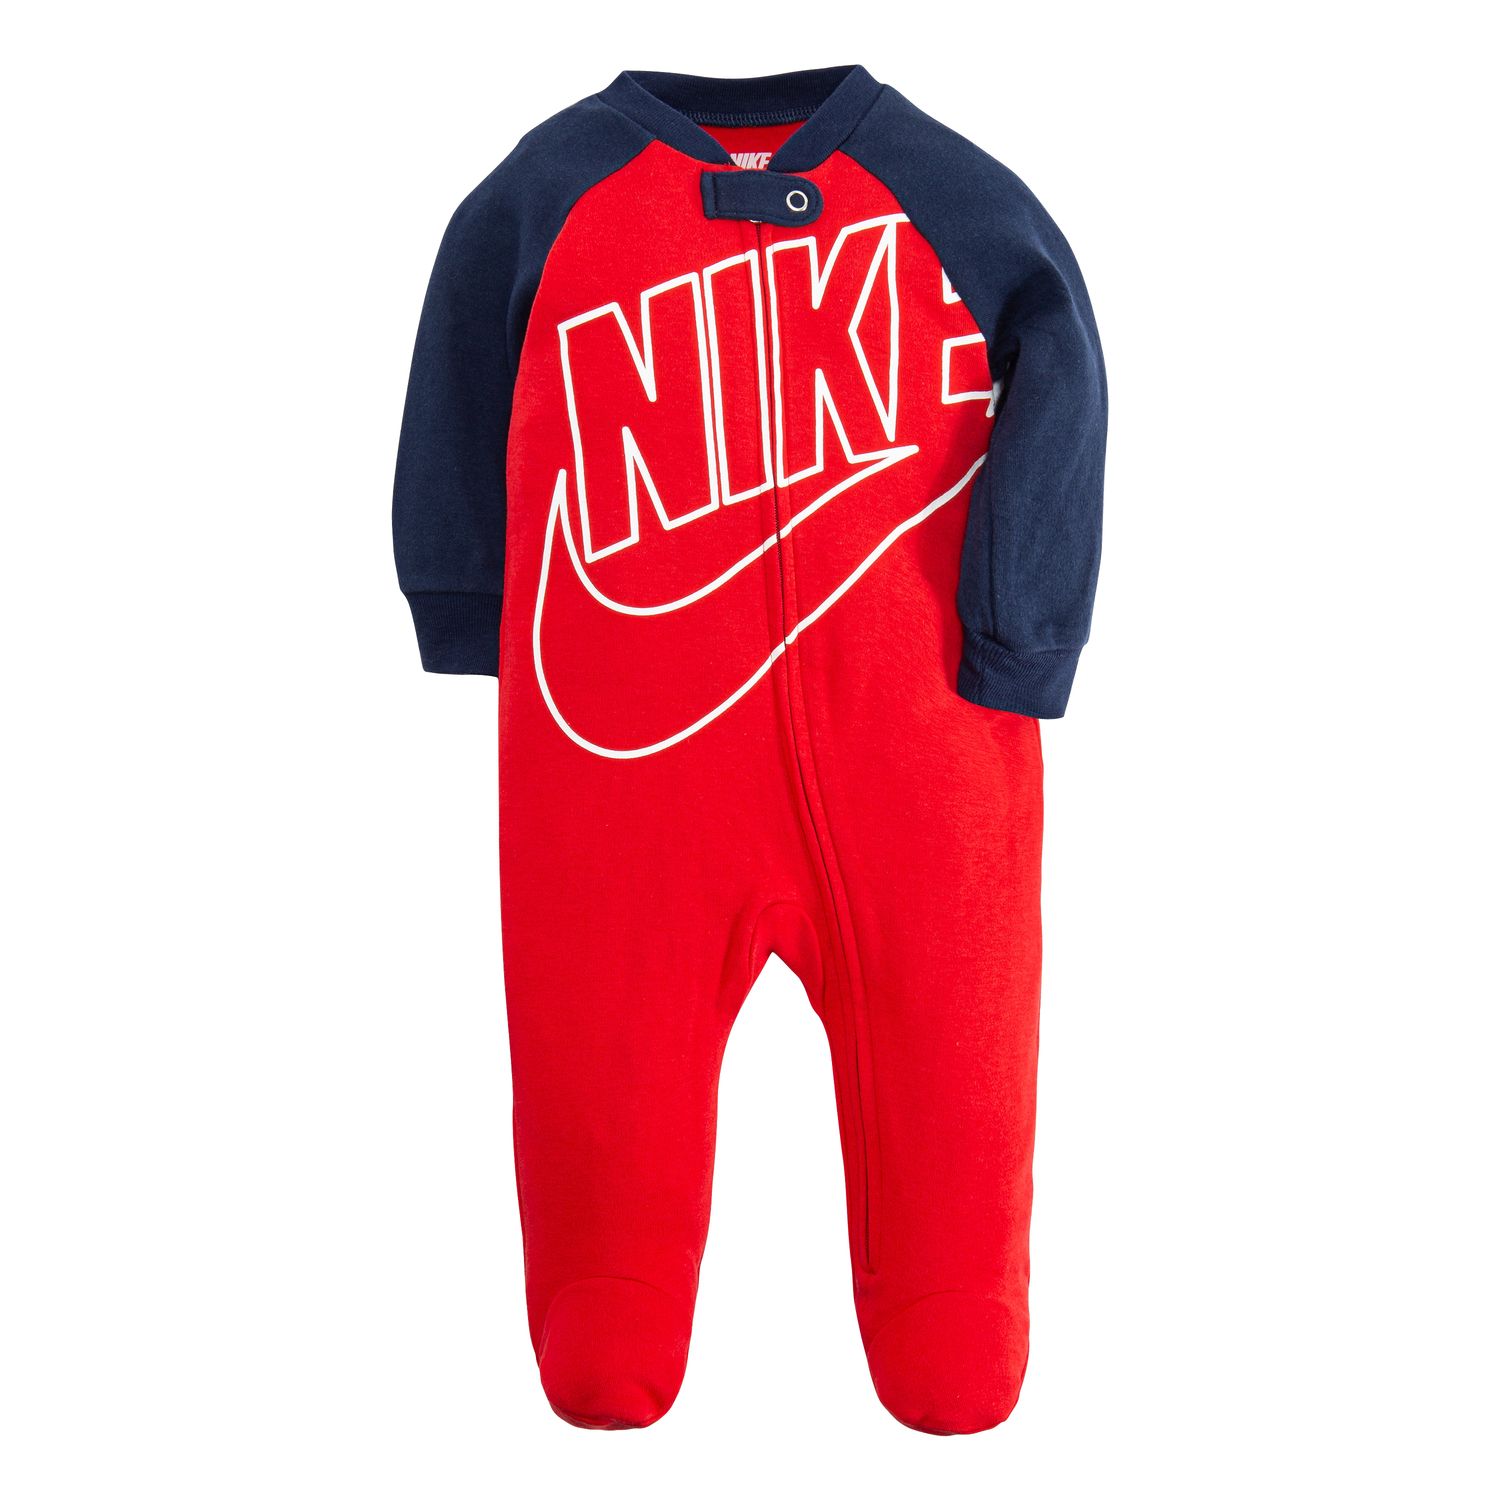 nike baby clothes 24 months